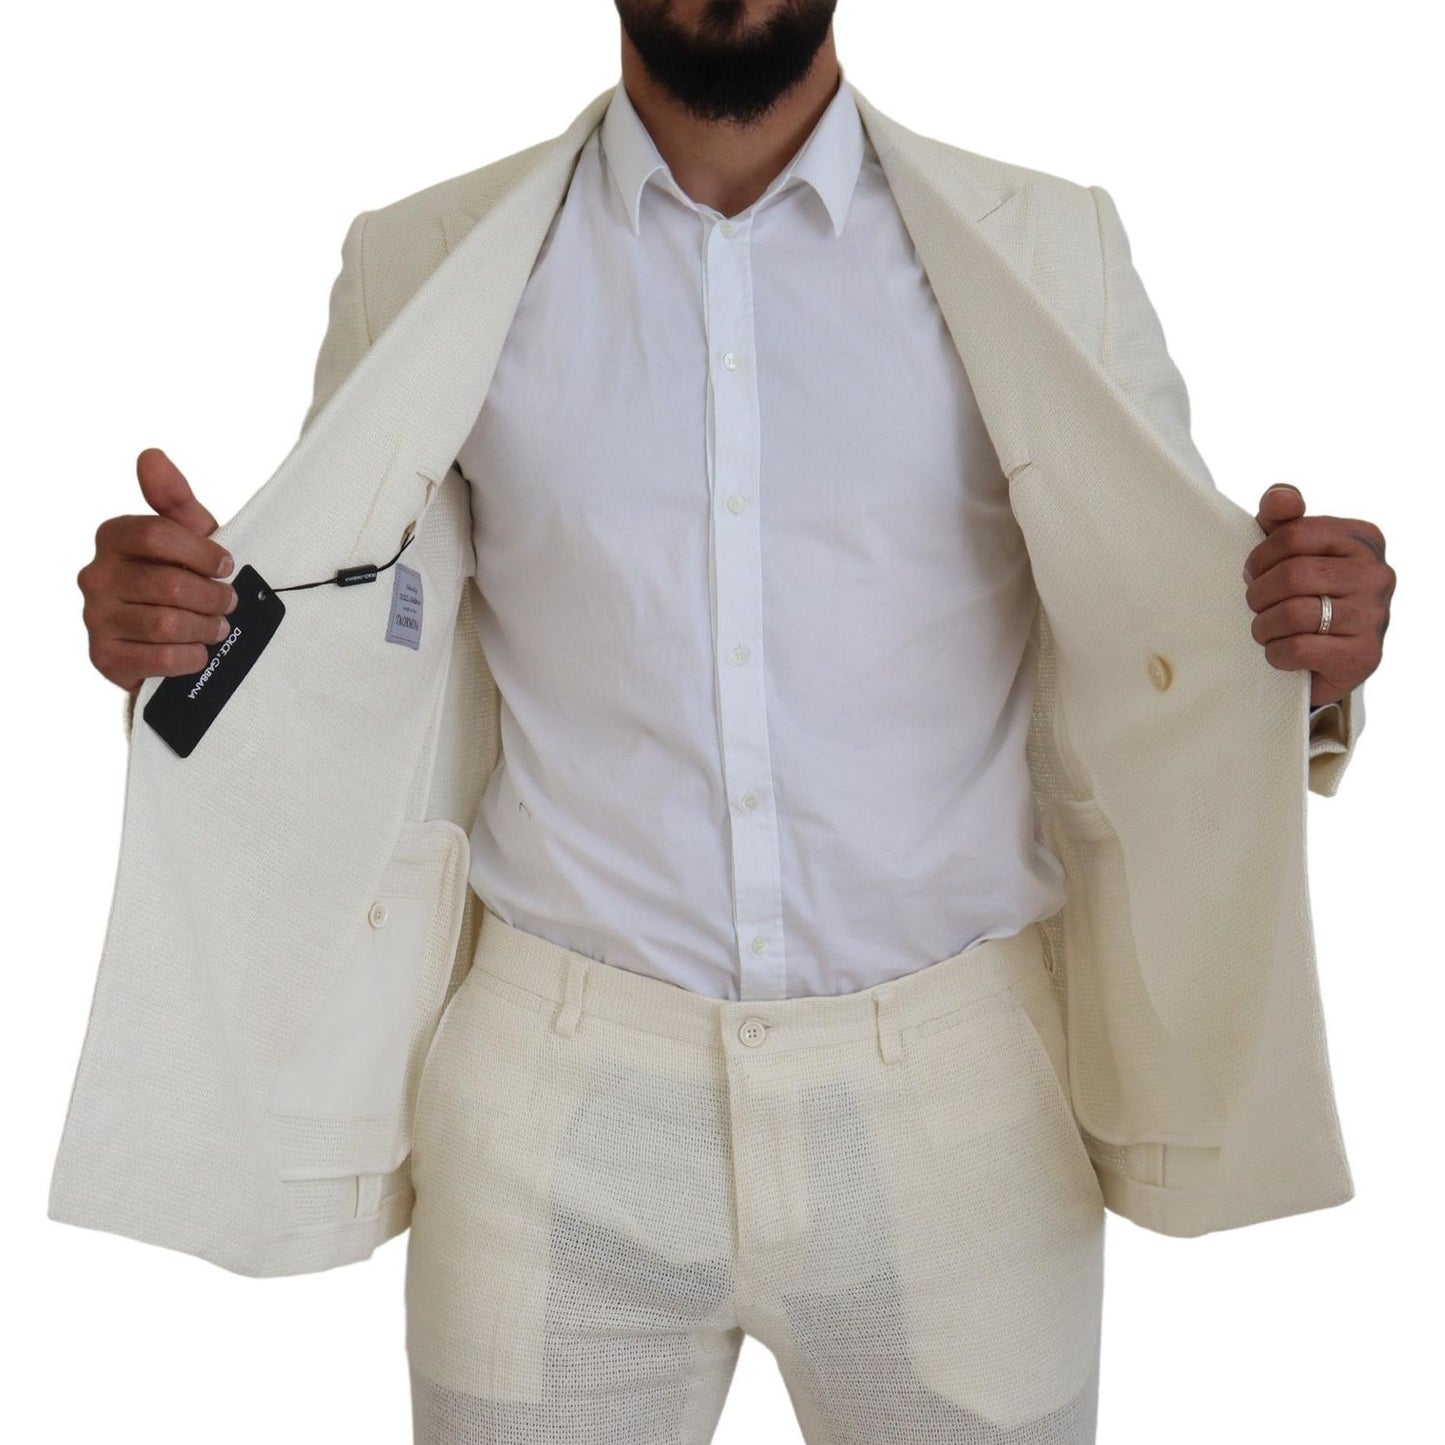 Dolce & Gabbana Elegant Off White Silk-Blend Suit white-double-breasted-2-piece-taormina-suit